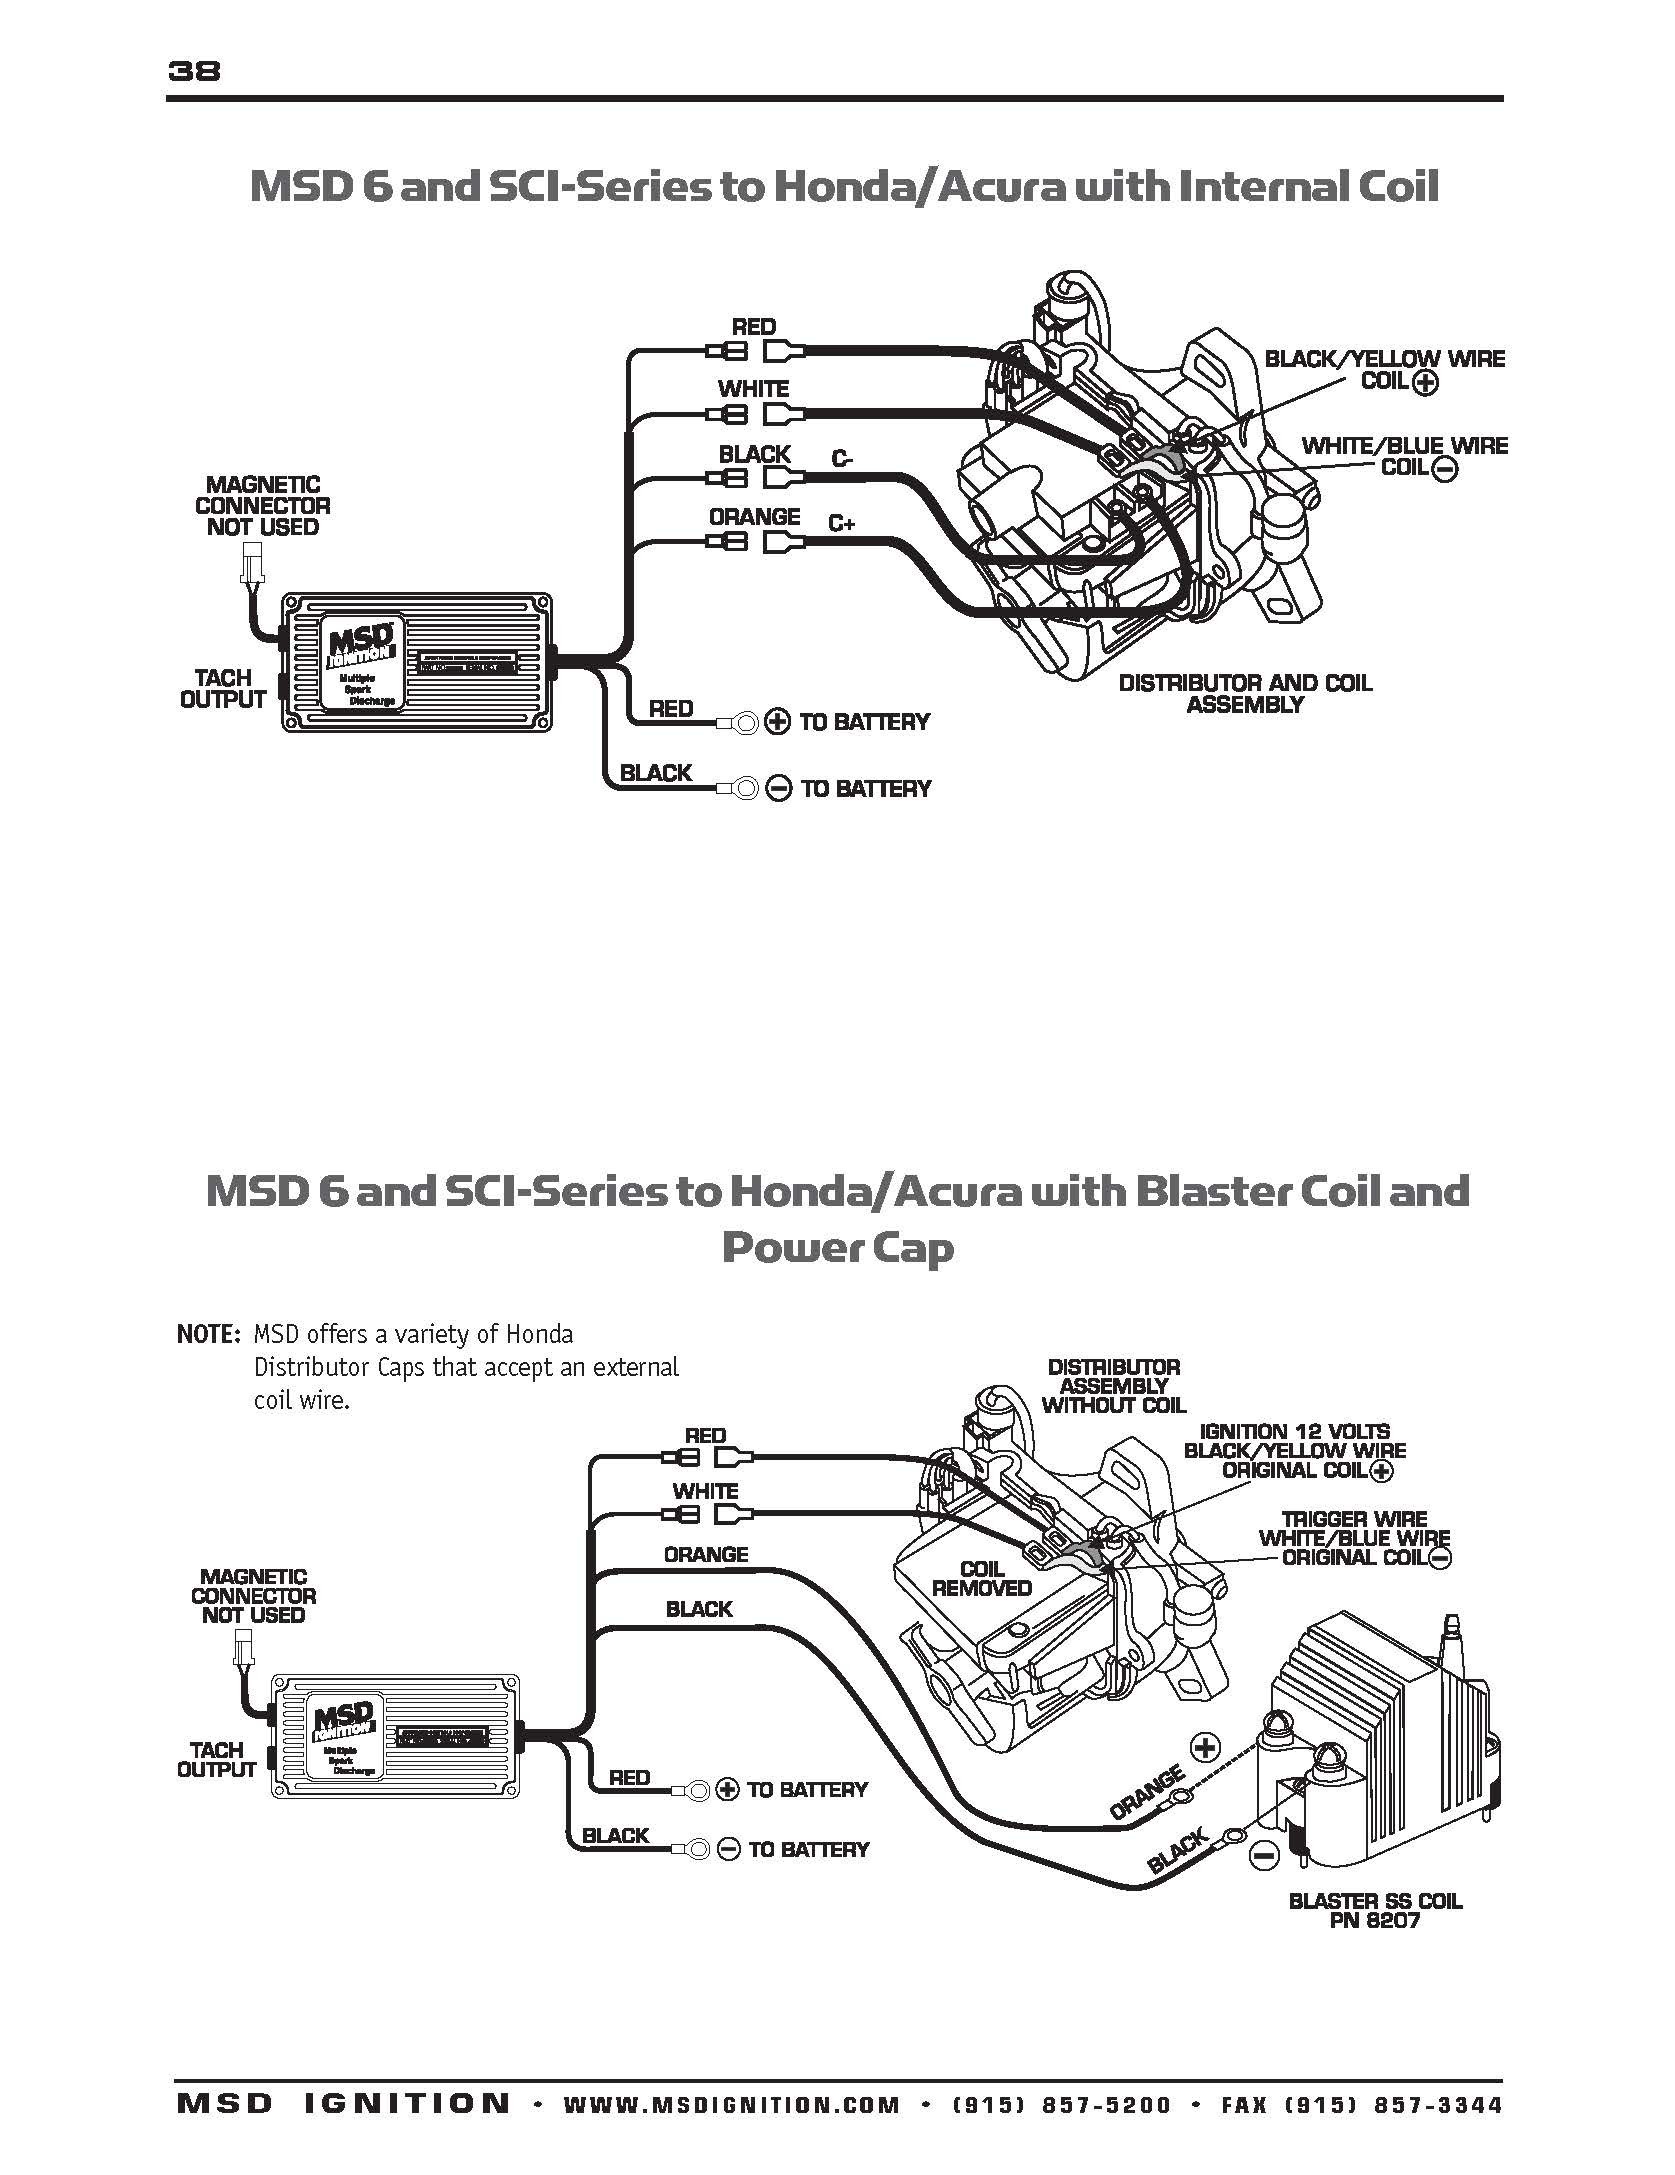 Msd Ignition System Wiring Diagram New Msd Ignition Wiring Diagrams Brianesser Best Diagram Coil